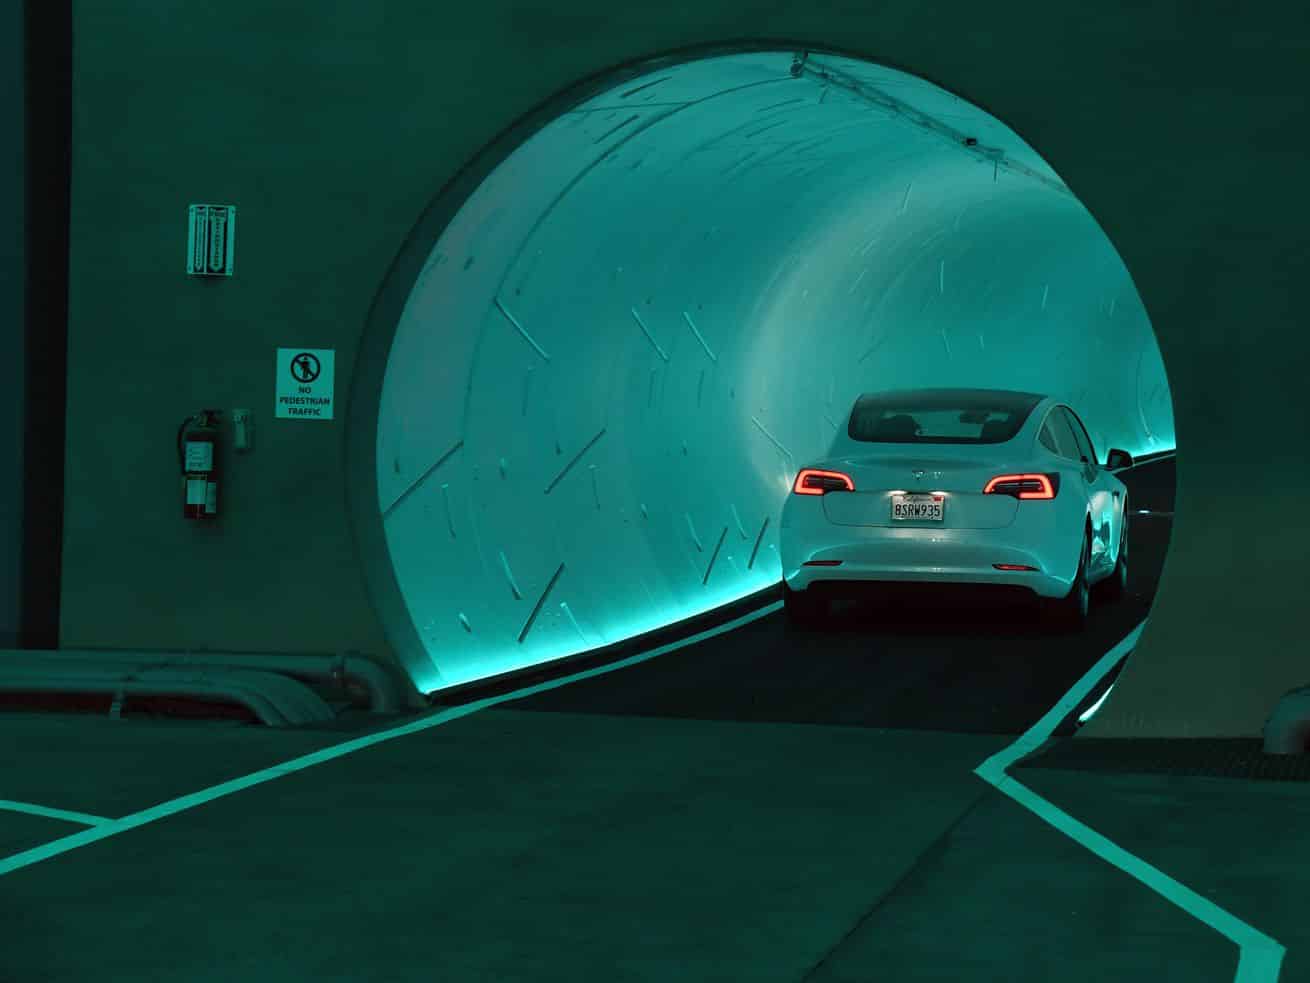 Elon Musk wants to dig a tunnel in Florida. What could go wrong?